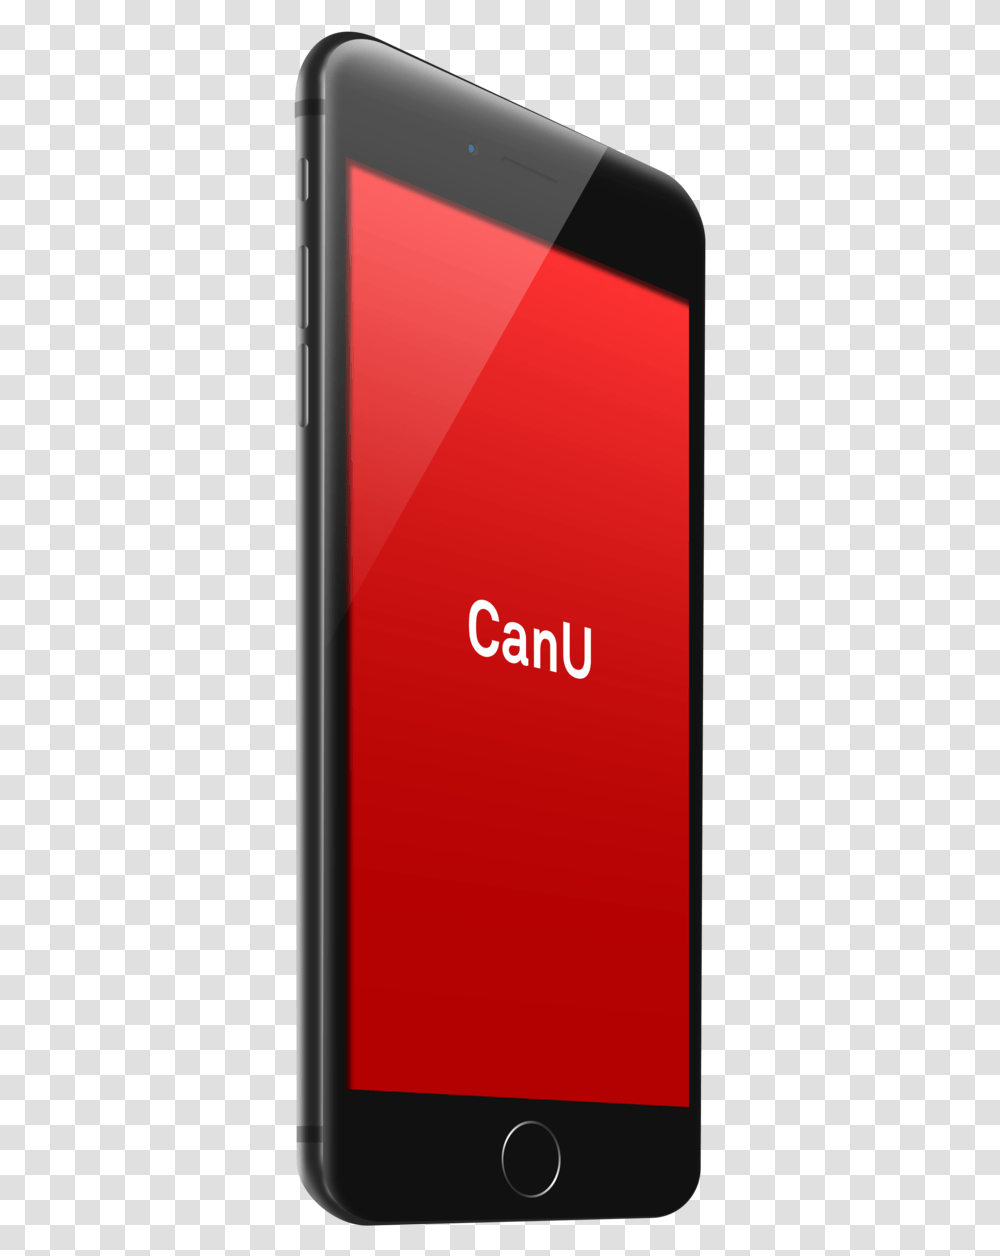 Copy Smartphone, Mobile Phone, Electronics, Cell Phone, Iphone Transparent Png